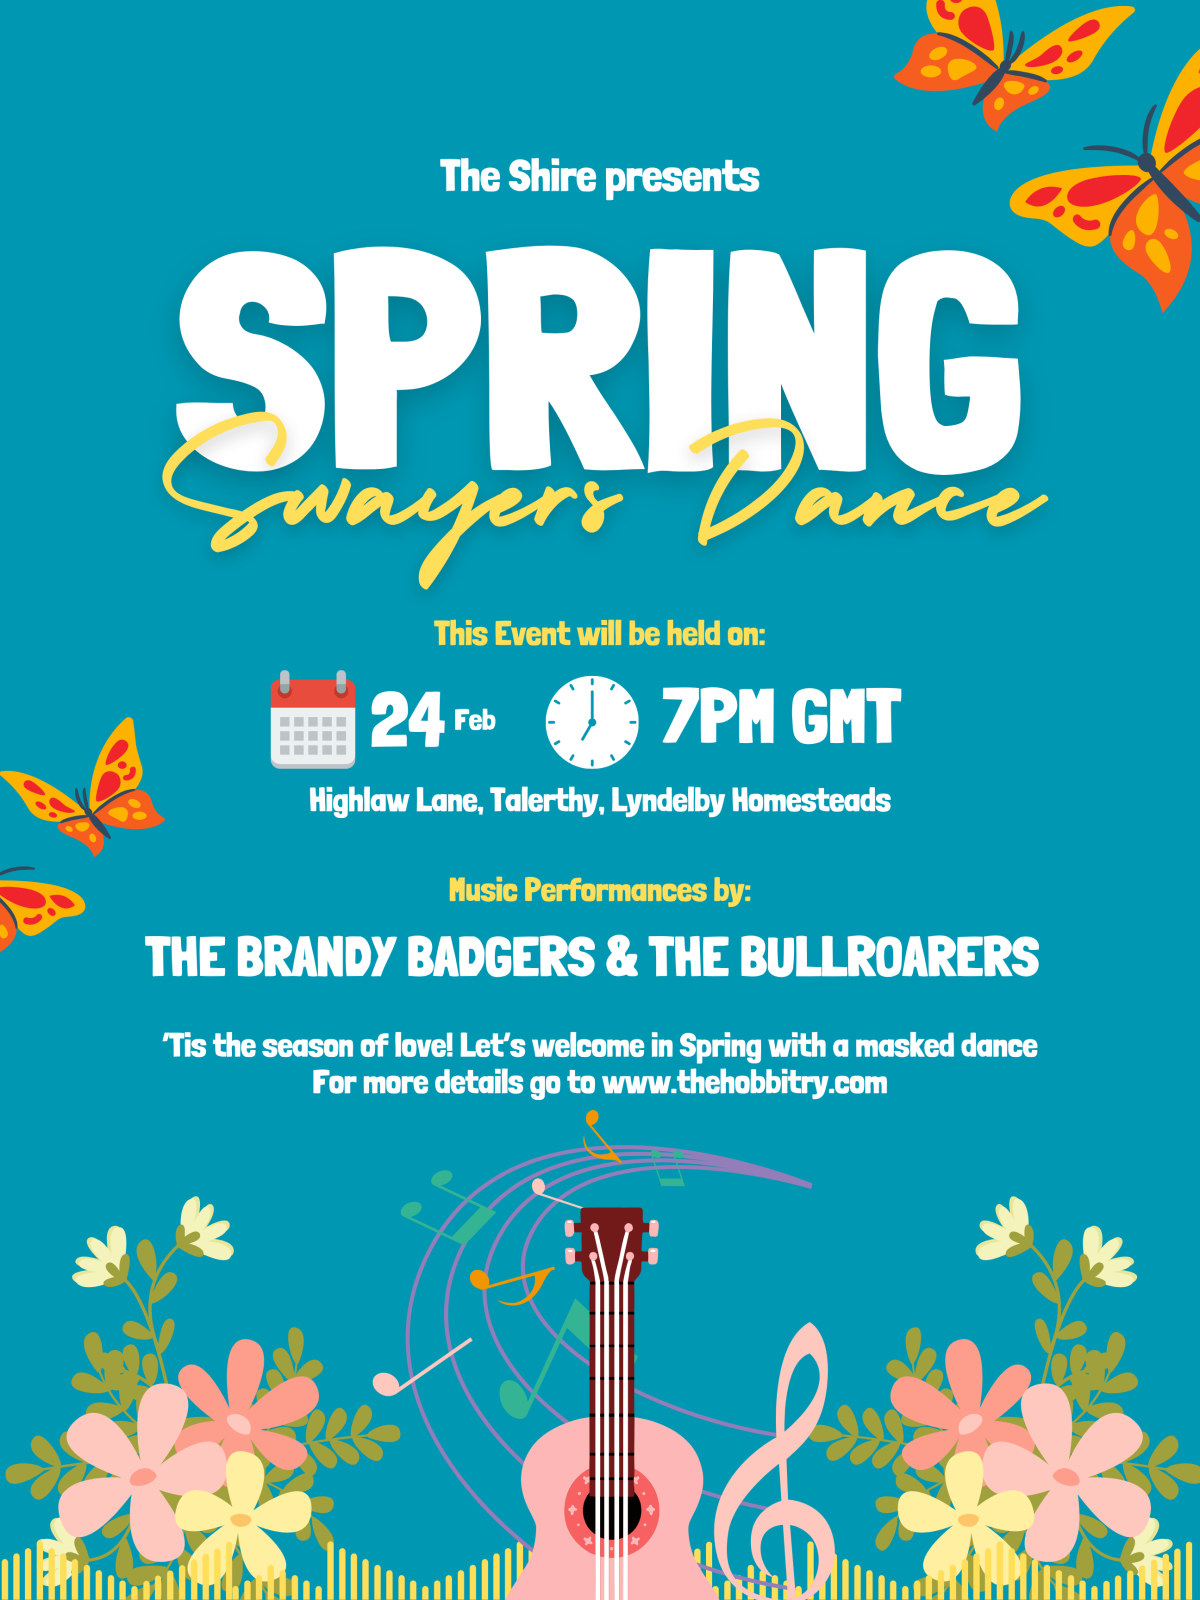 Event: The Sping Swayers Dance